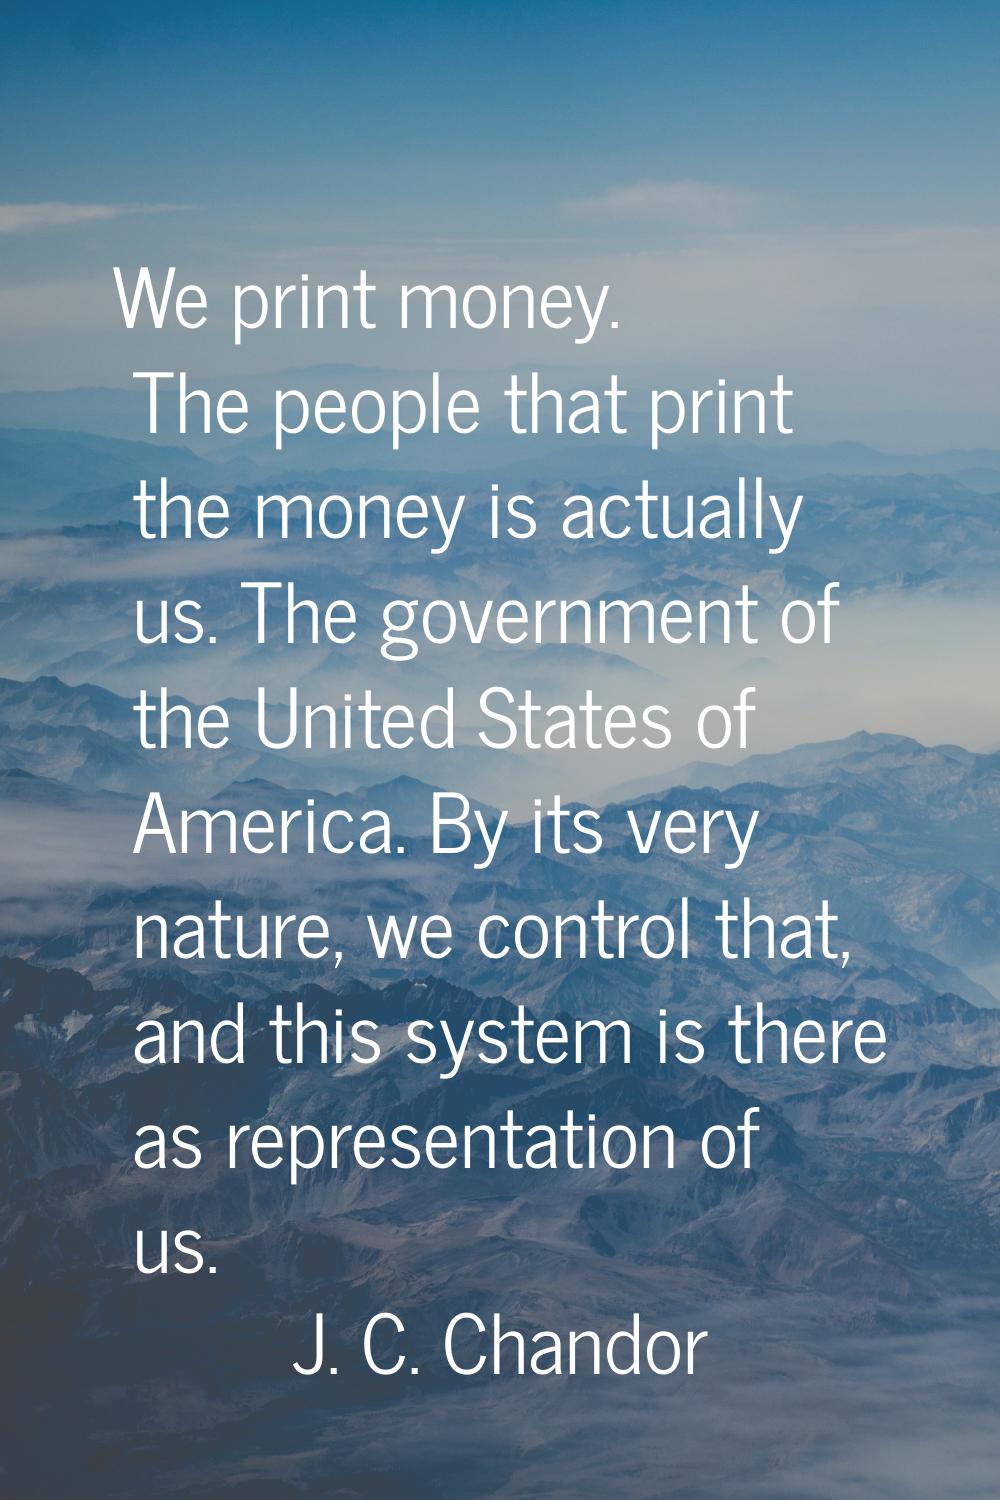 We print money. The people that print the money is actually us. The government of the United States